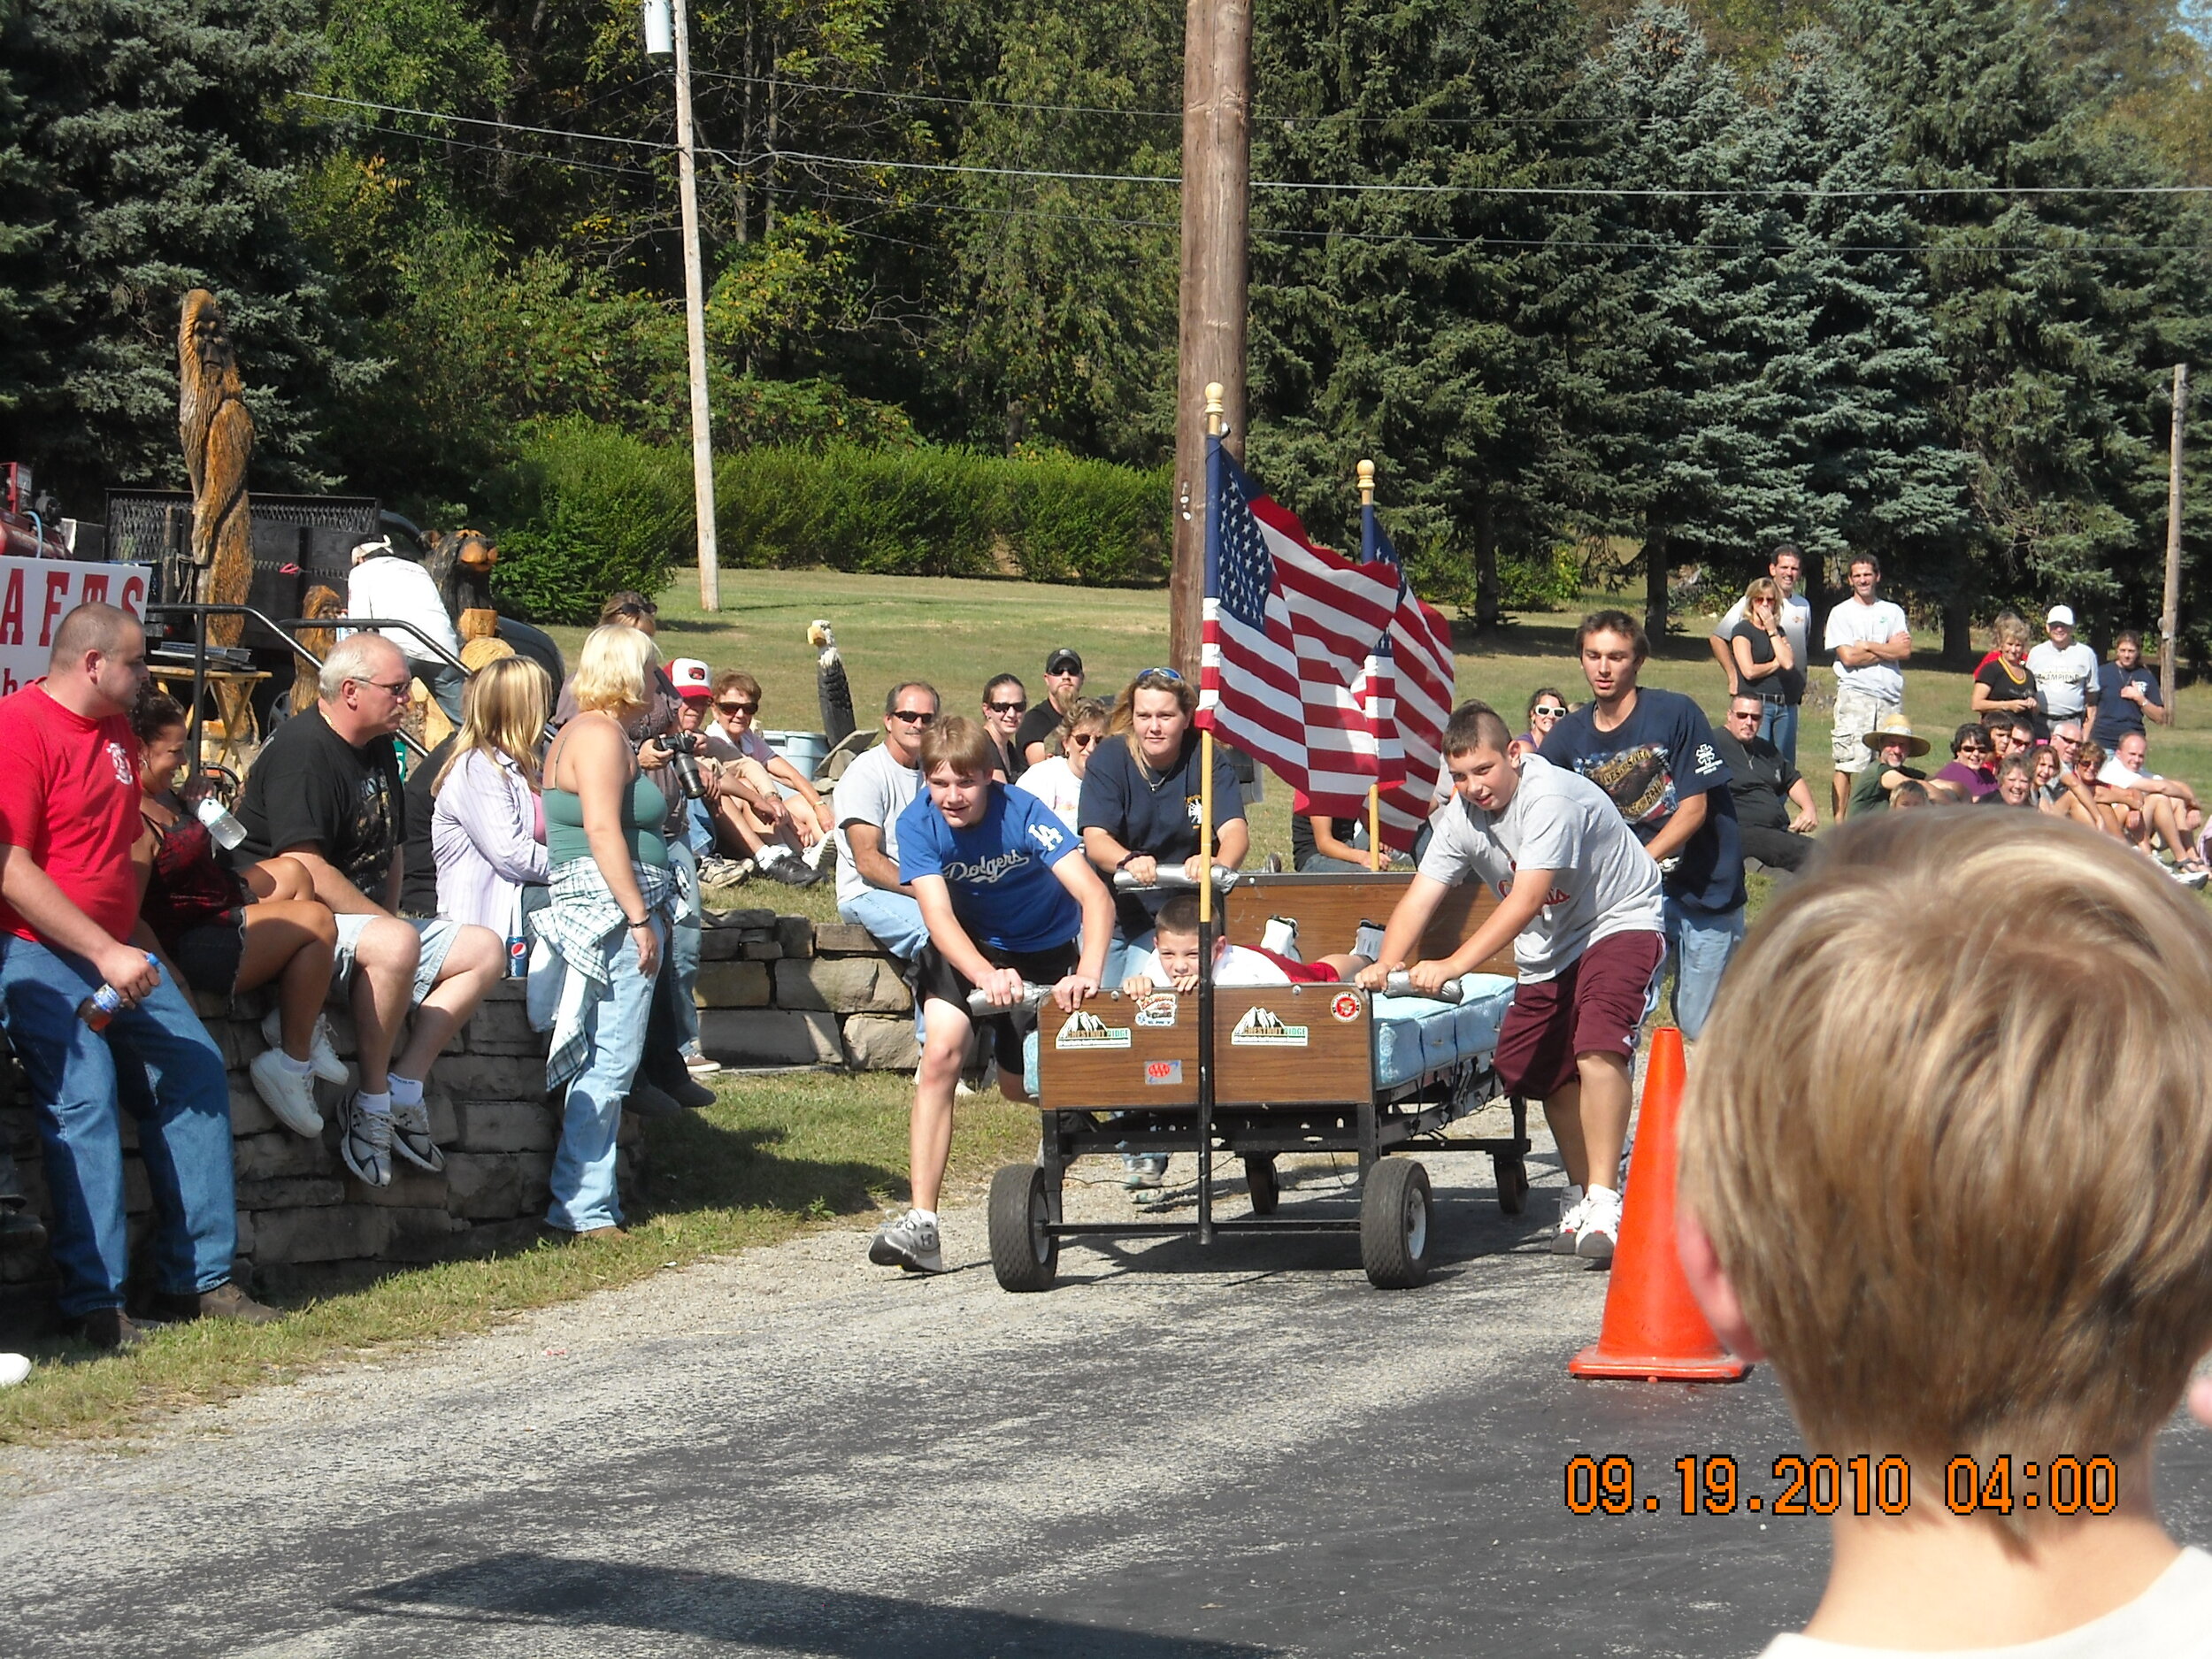  Bed Race from the Kecksburg UFO Festival.  Photo ©Ron Struble 